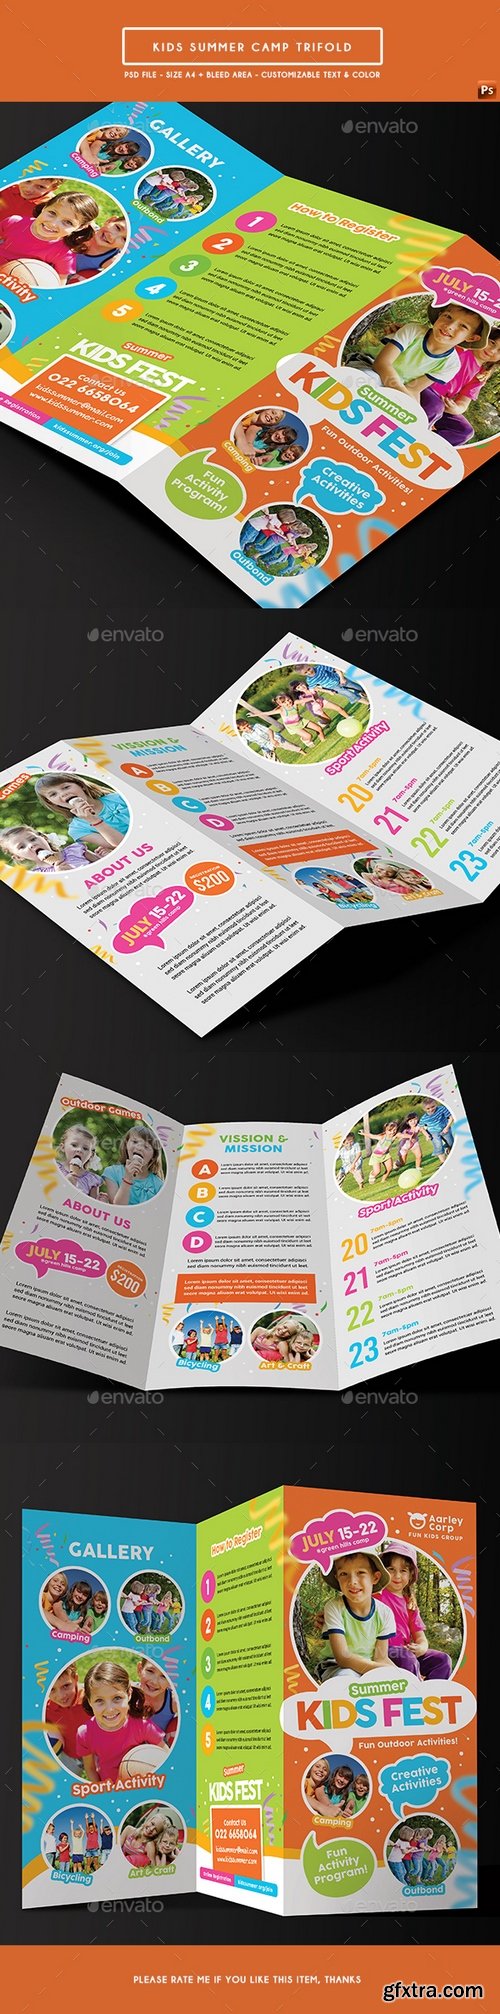 Graphicriver - Kids Summer Camp Trifold 19559166